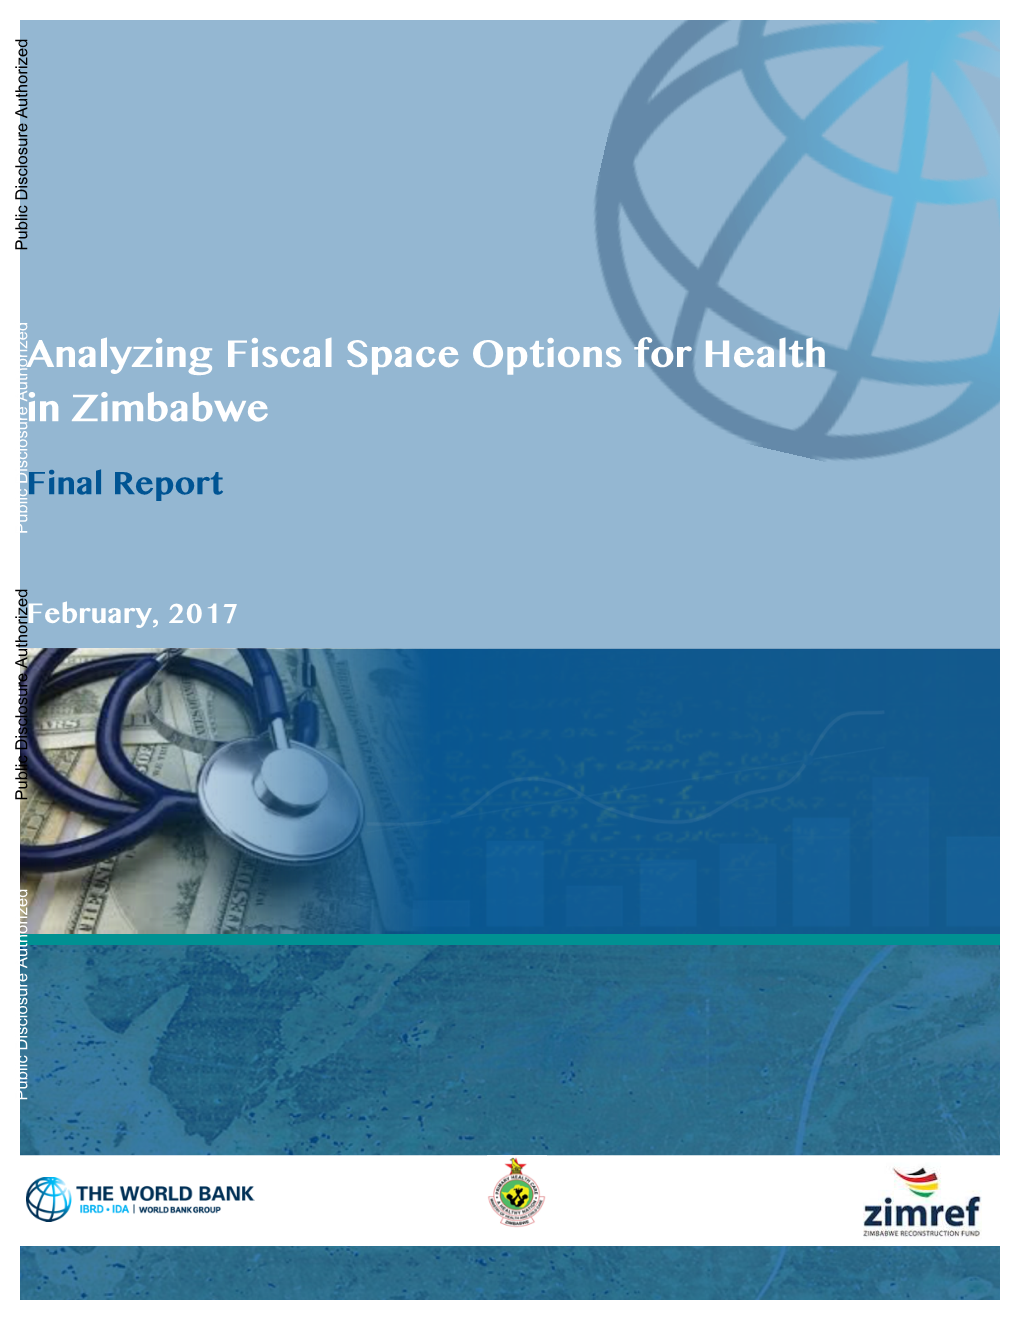 Analyzing Fiscal Space Options for Health in Zimbabwe Final Report Public Disclosure Authorized